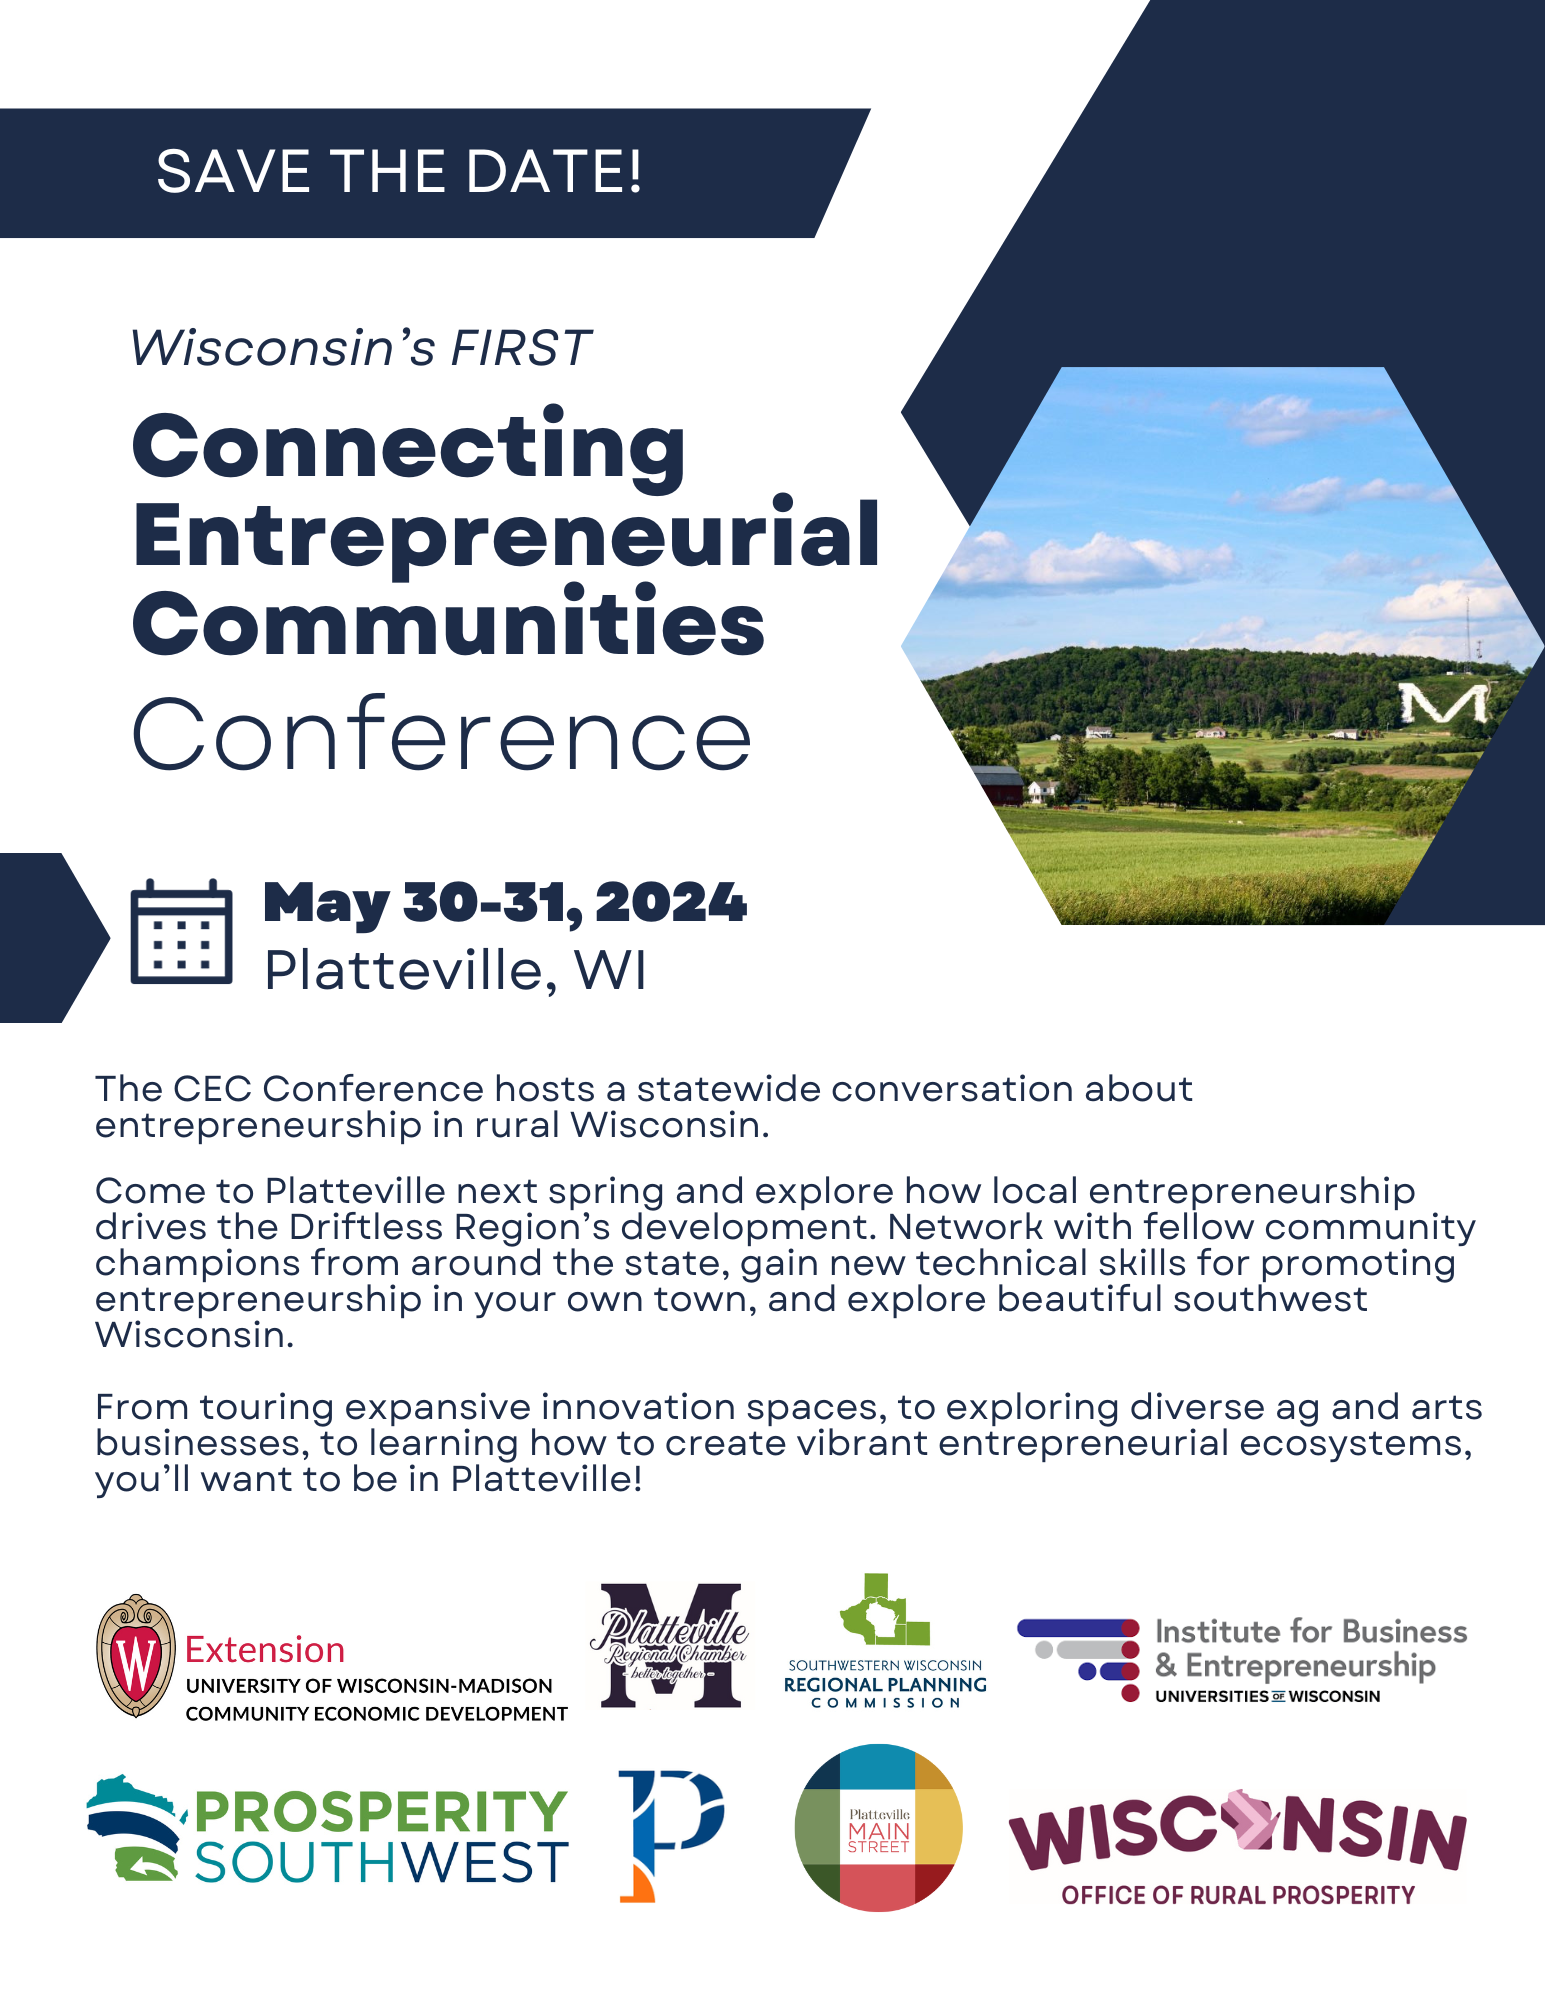 Connecting Entrepreneurial Communities Conference coming to Southwest Wisconsin